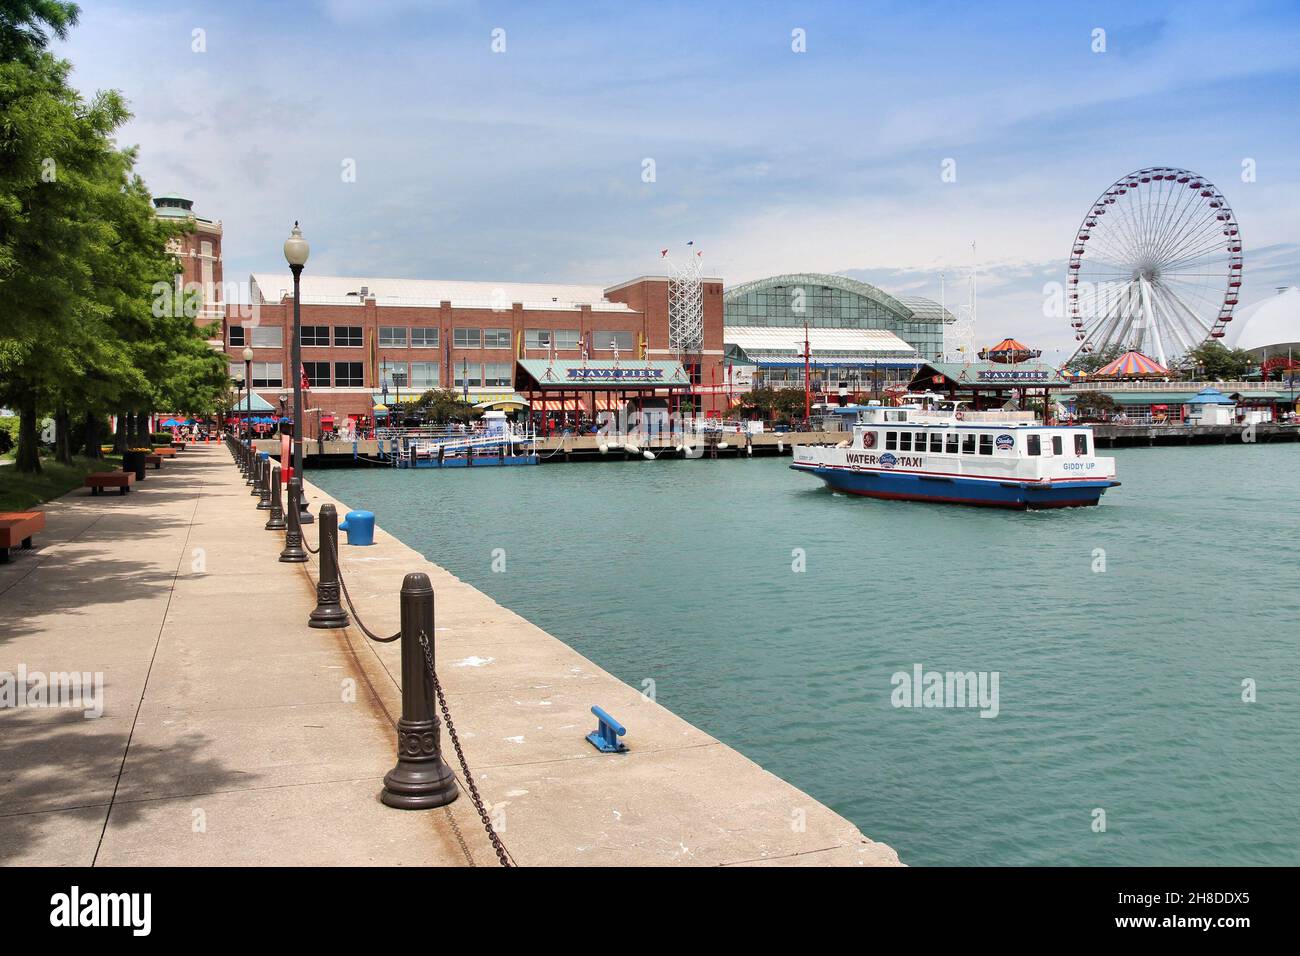 CHICAGO, USA - JUNE 26, 2013: People visit the Navy Pier in Chicago. The 3,300-foot pier built in 1916 is one of most recognized Chicago landmarks. Stock Photo